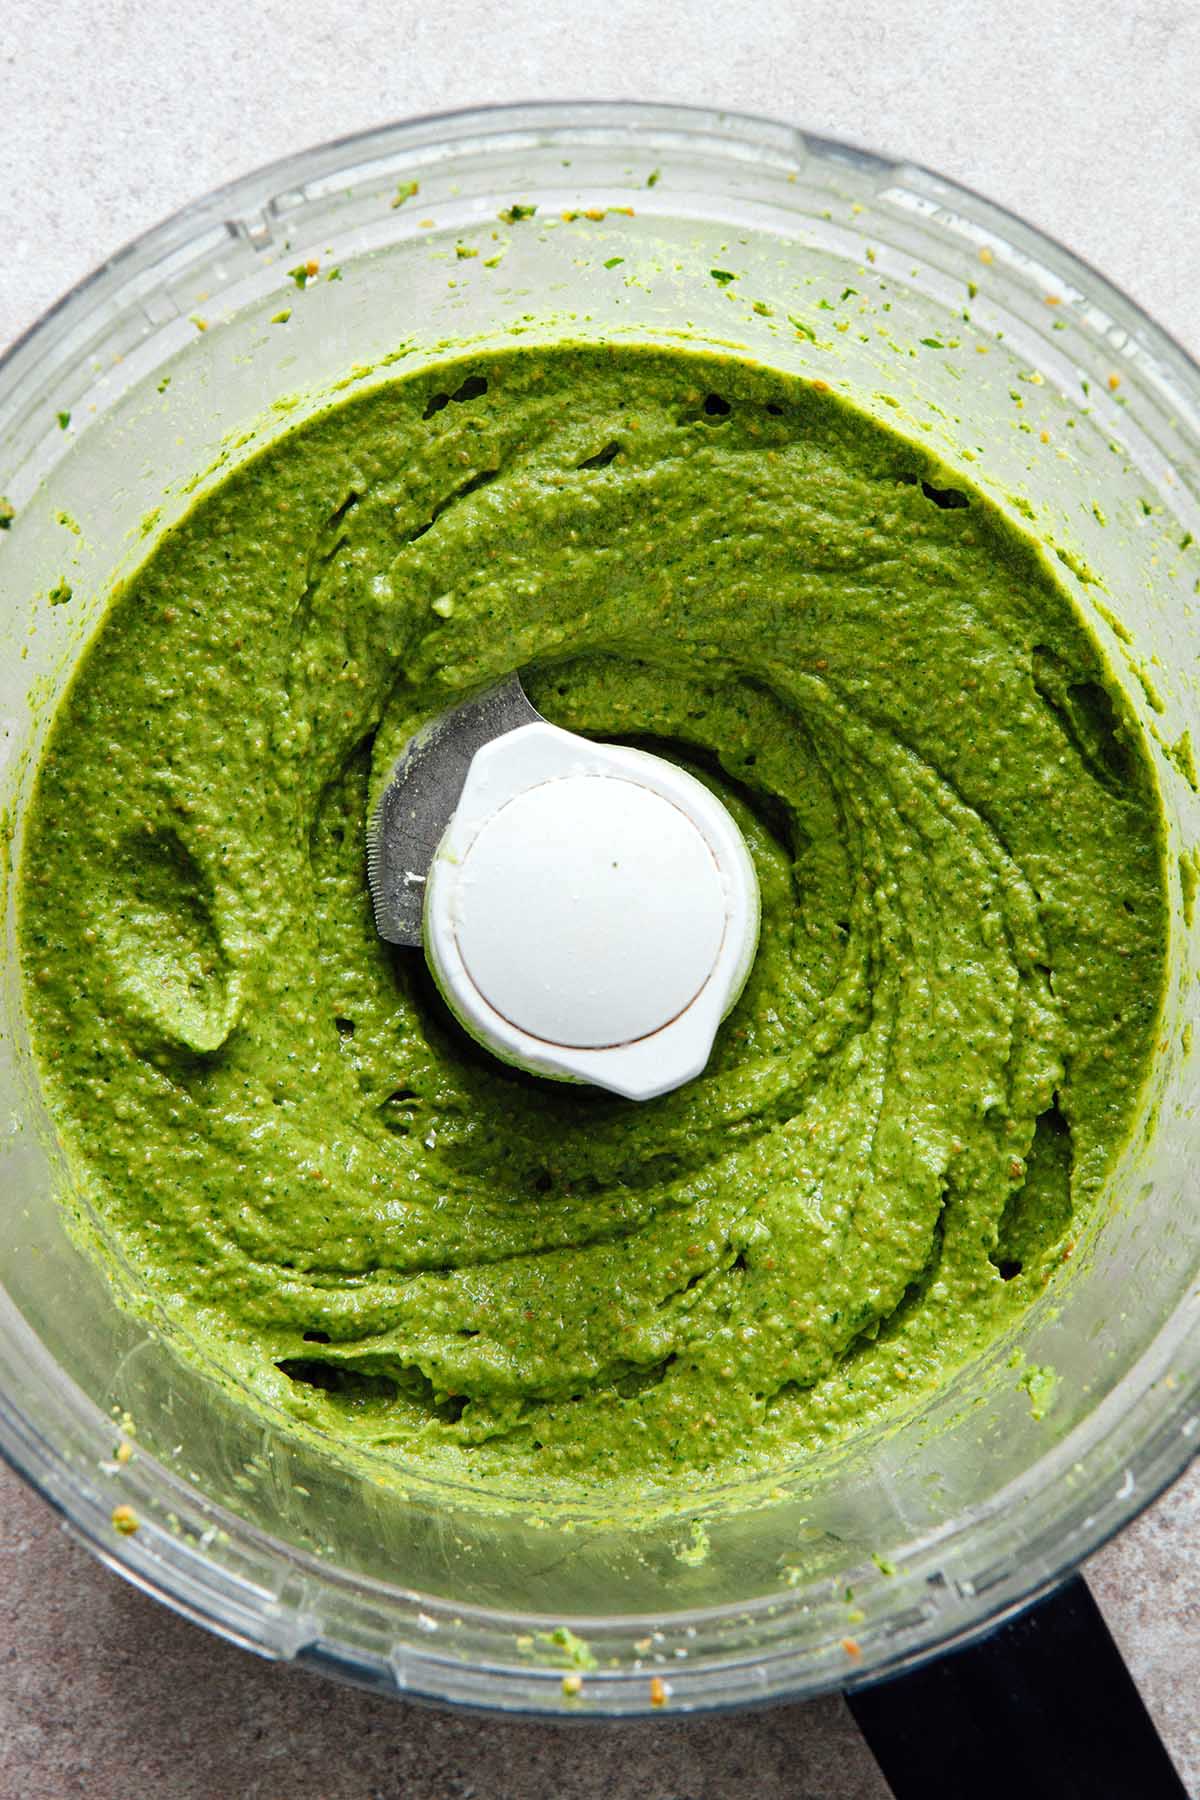 Homemade pesto in the bowl of a food processor after the olive oil has been slowly dribbled in.